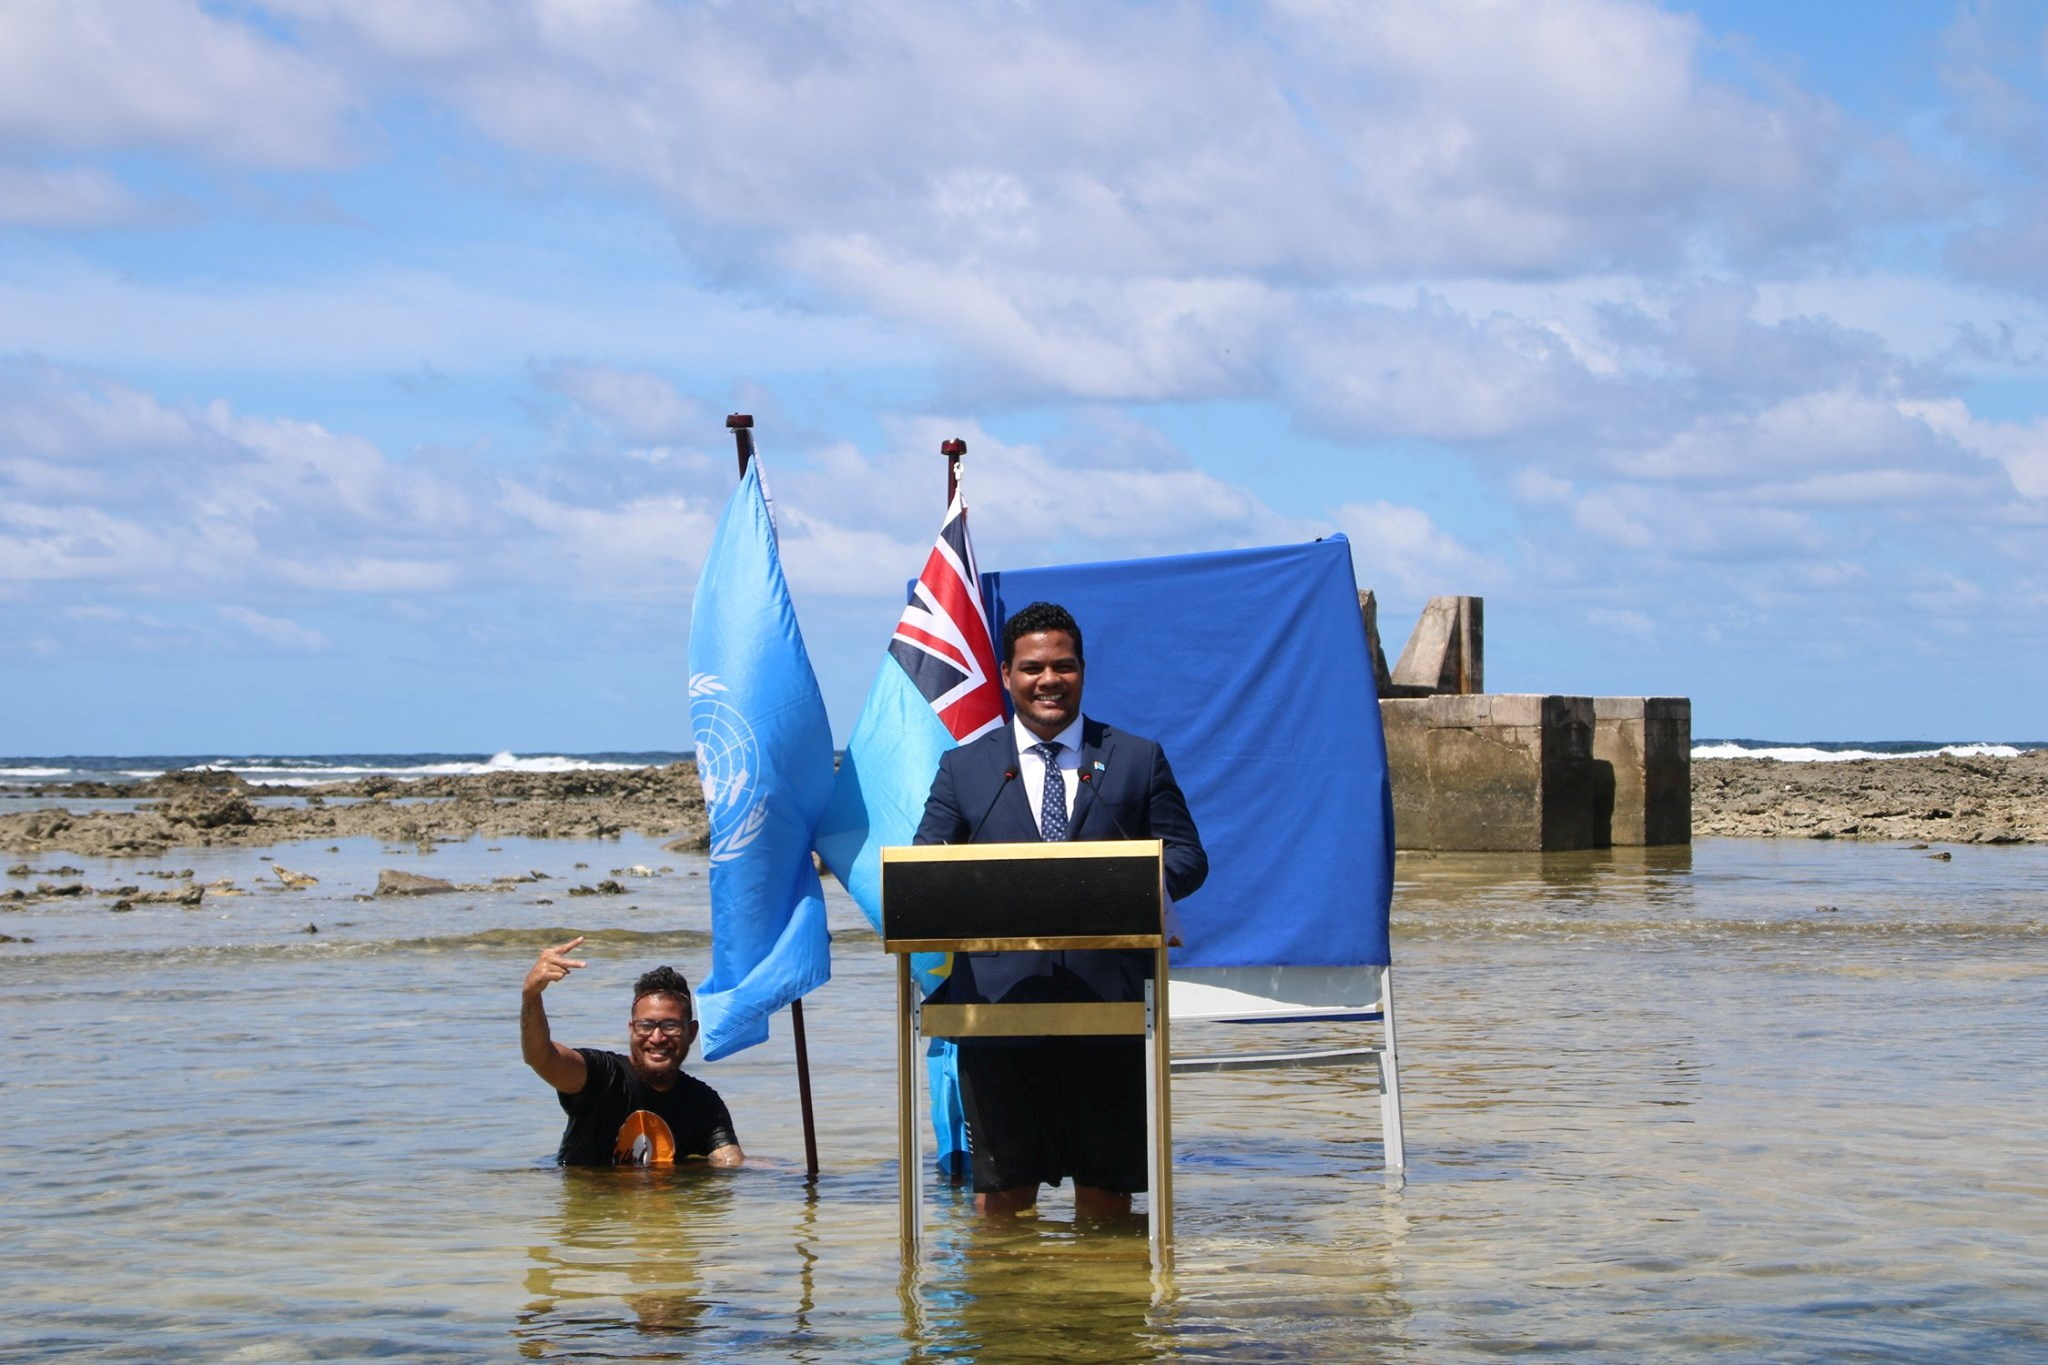 Tuvalu's Minister for Justice, Communication & Foreign Affairs Simon Kofe gives a COP26 statement while standing in the ocean in Funafuti, Tuvalu November 5, 2021. Courtesy Tuvalu's Ministry of Justice, Communication and Foreign Affairs / Social Media via REUTERS